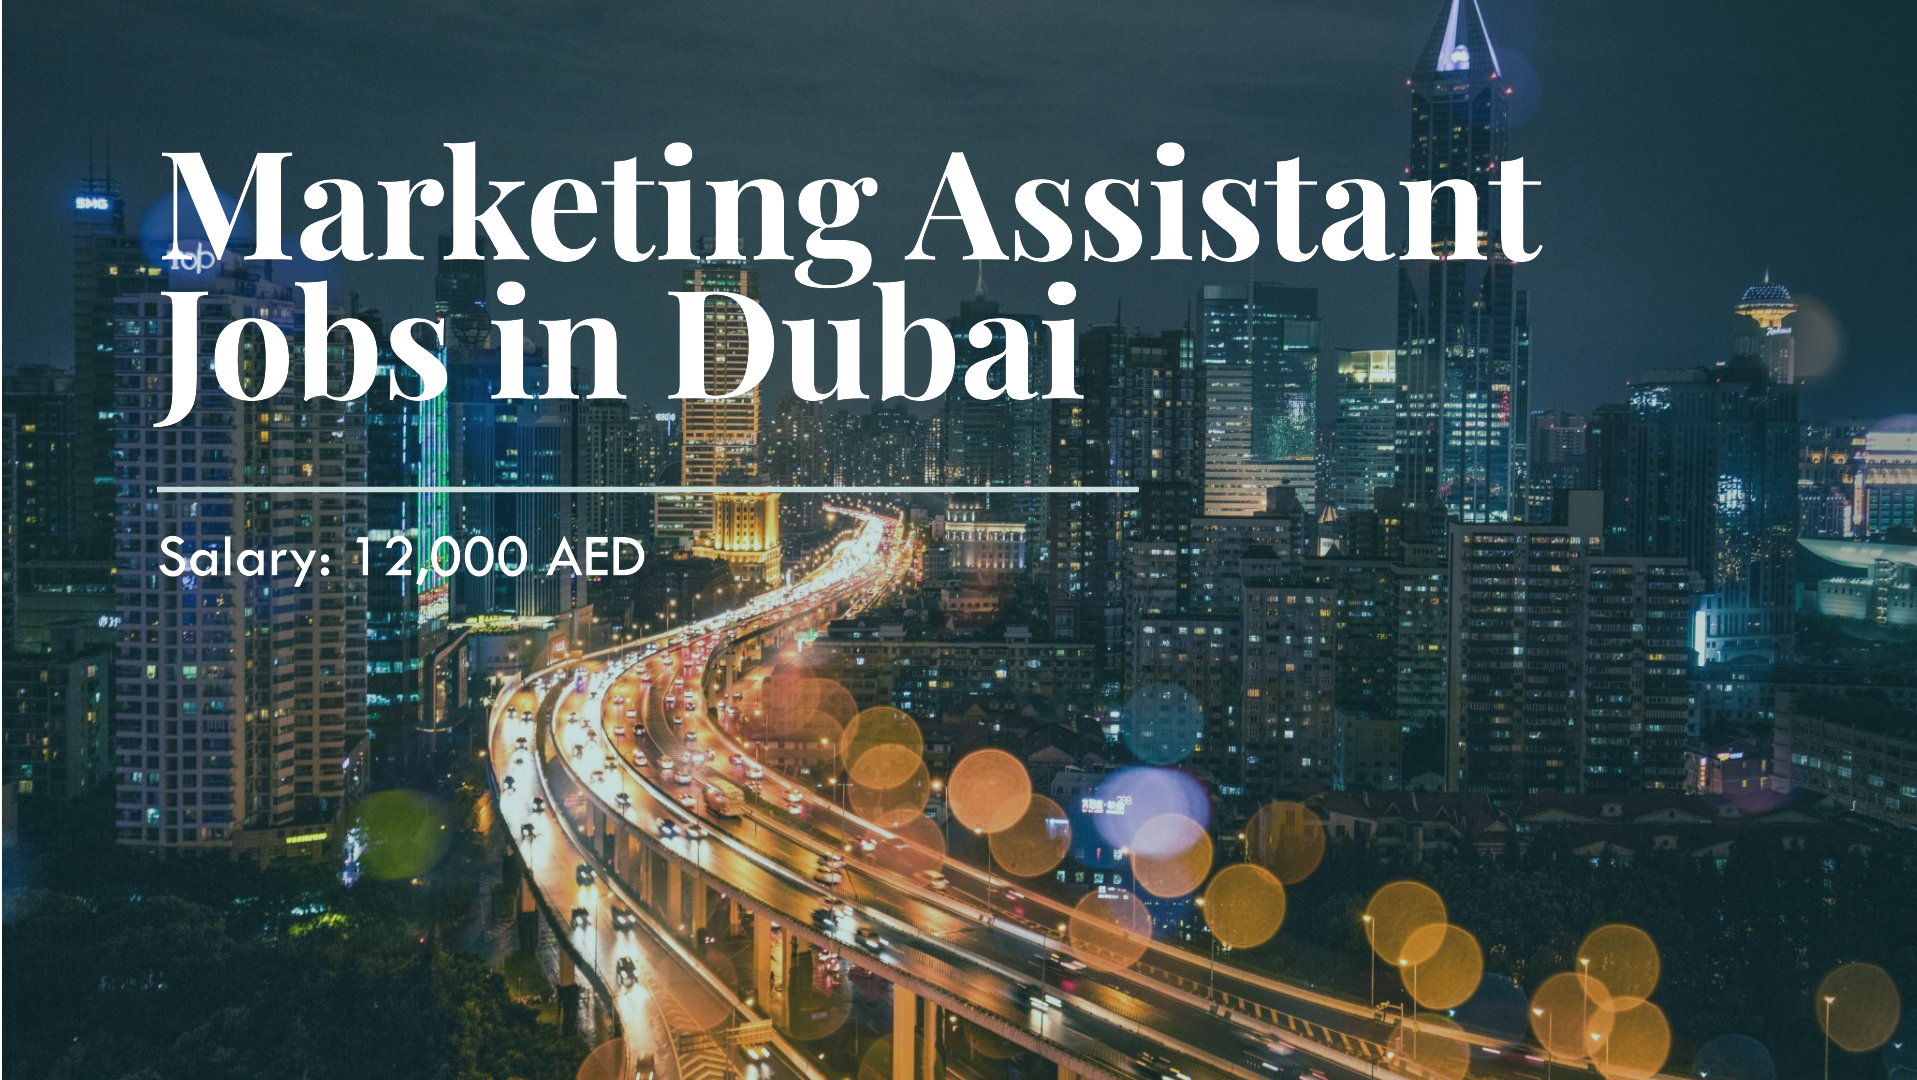 Marketing Assistant jobs in Dubai with Salary 12,000 AED